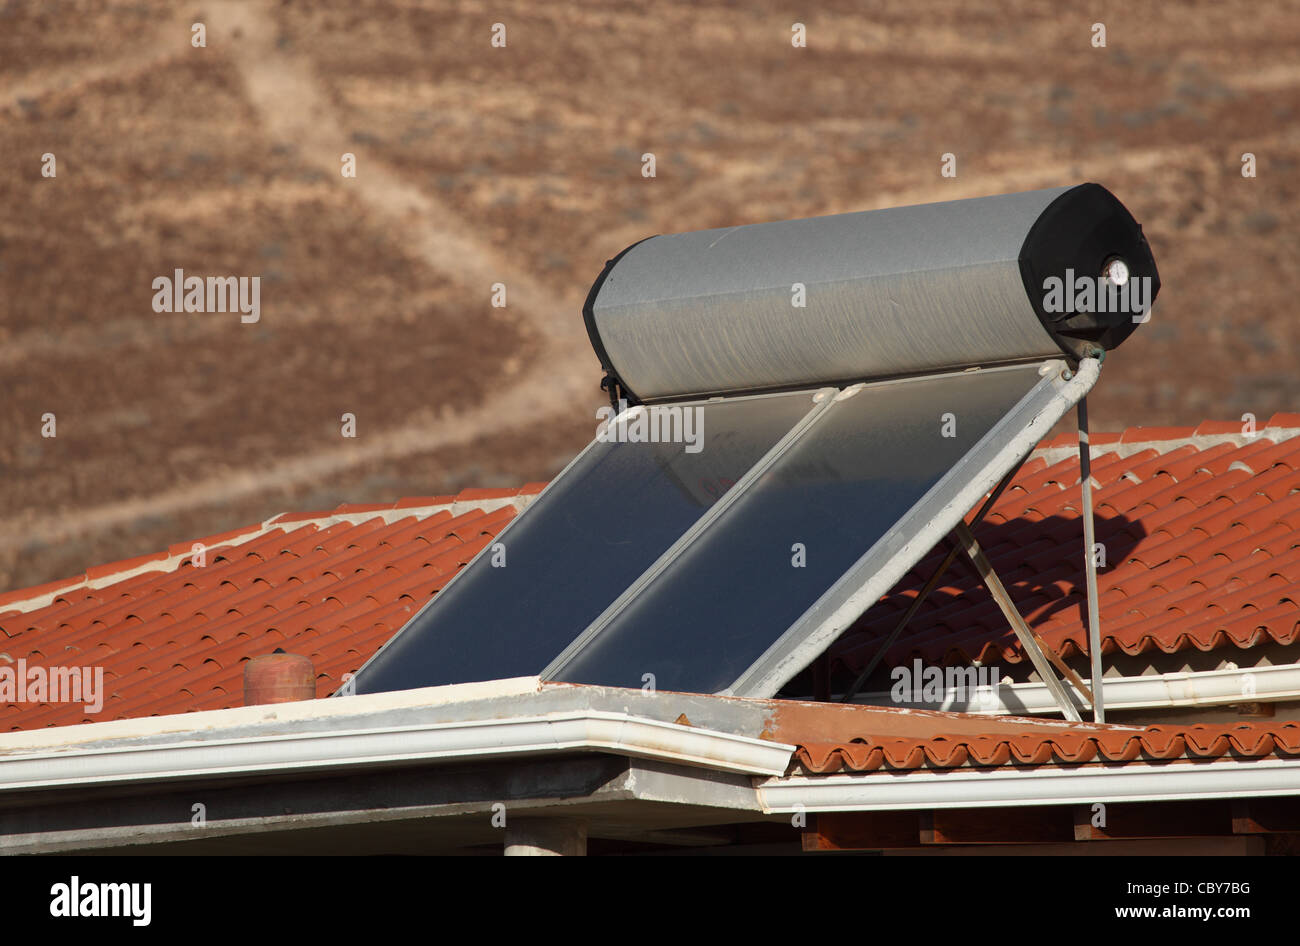 Water heating solar panels on the roof Stock Photo